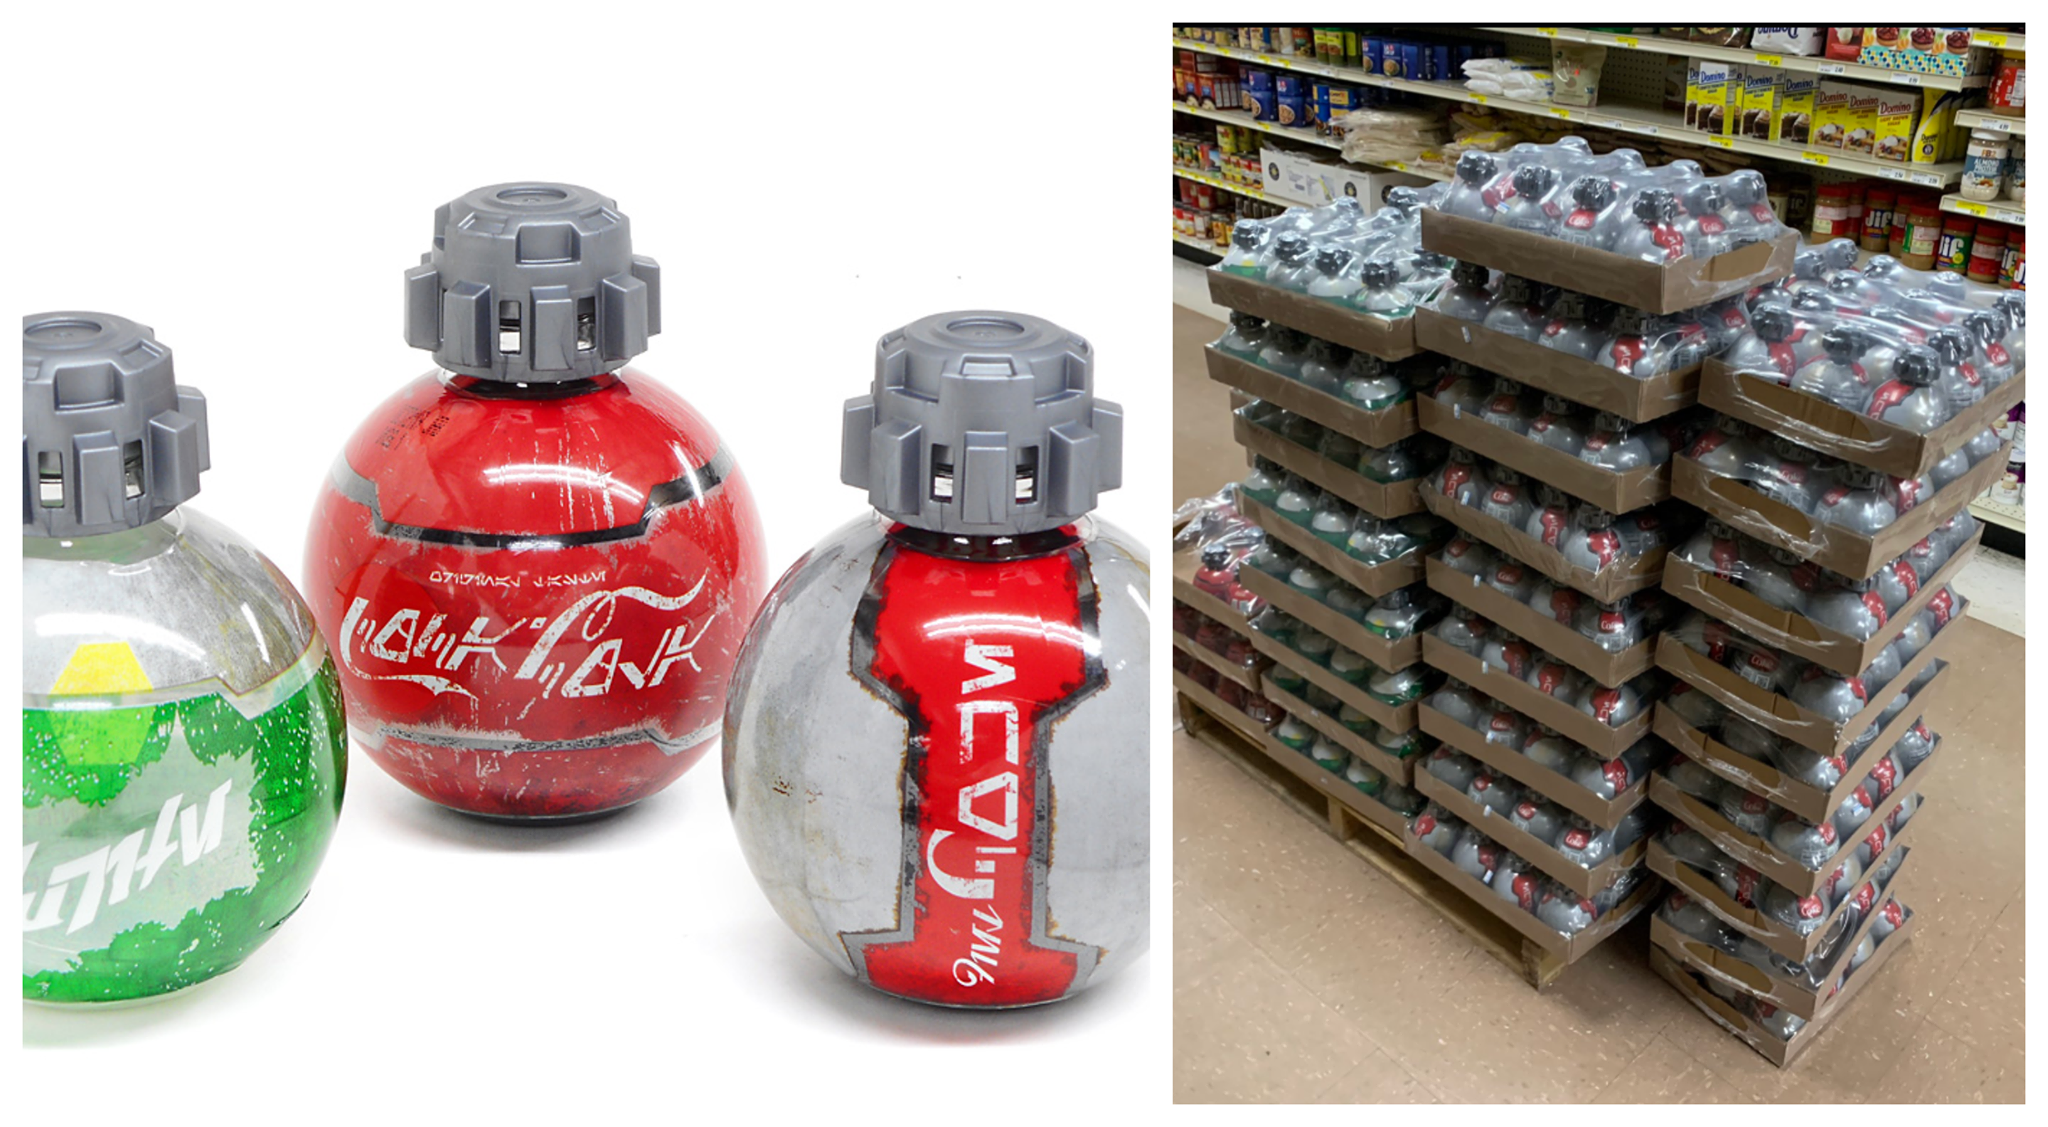 Star Wars Galaxy’s Edge Coca-Cola Bottles Make an Appearance in an Unlikely Store